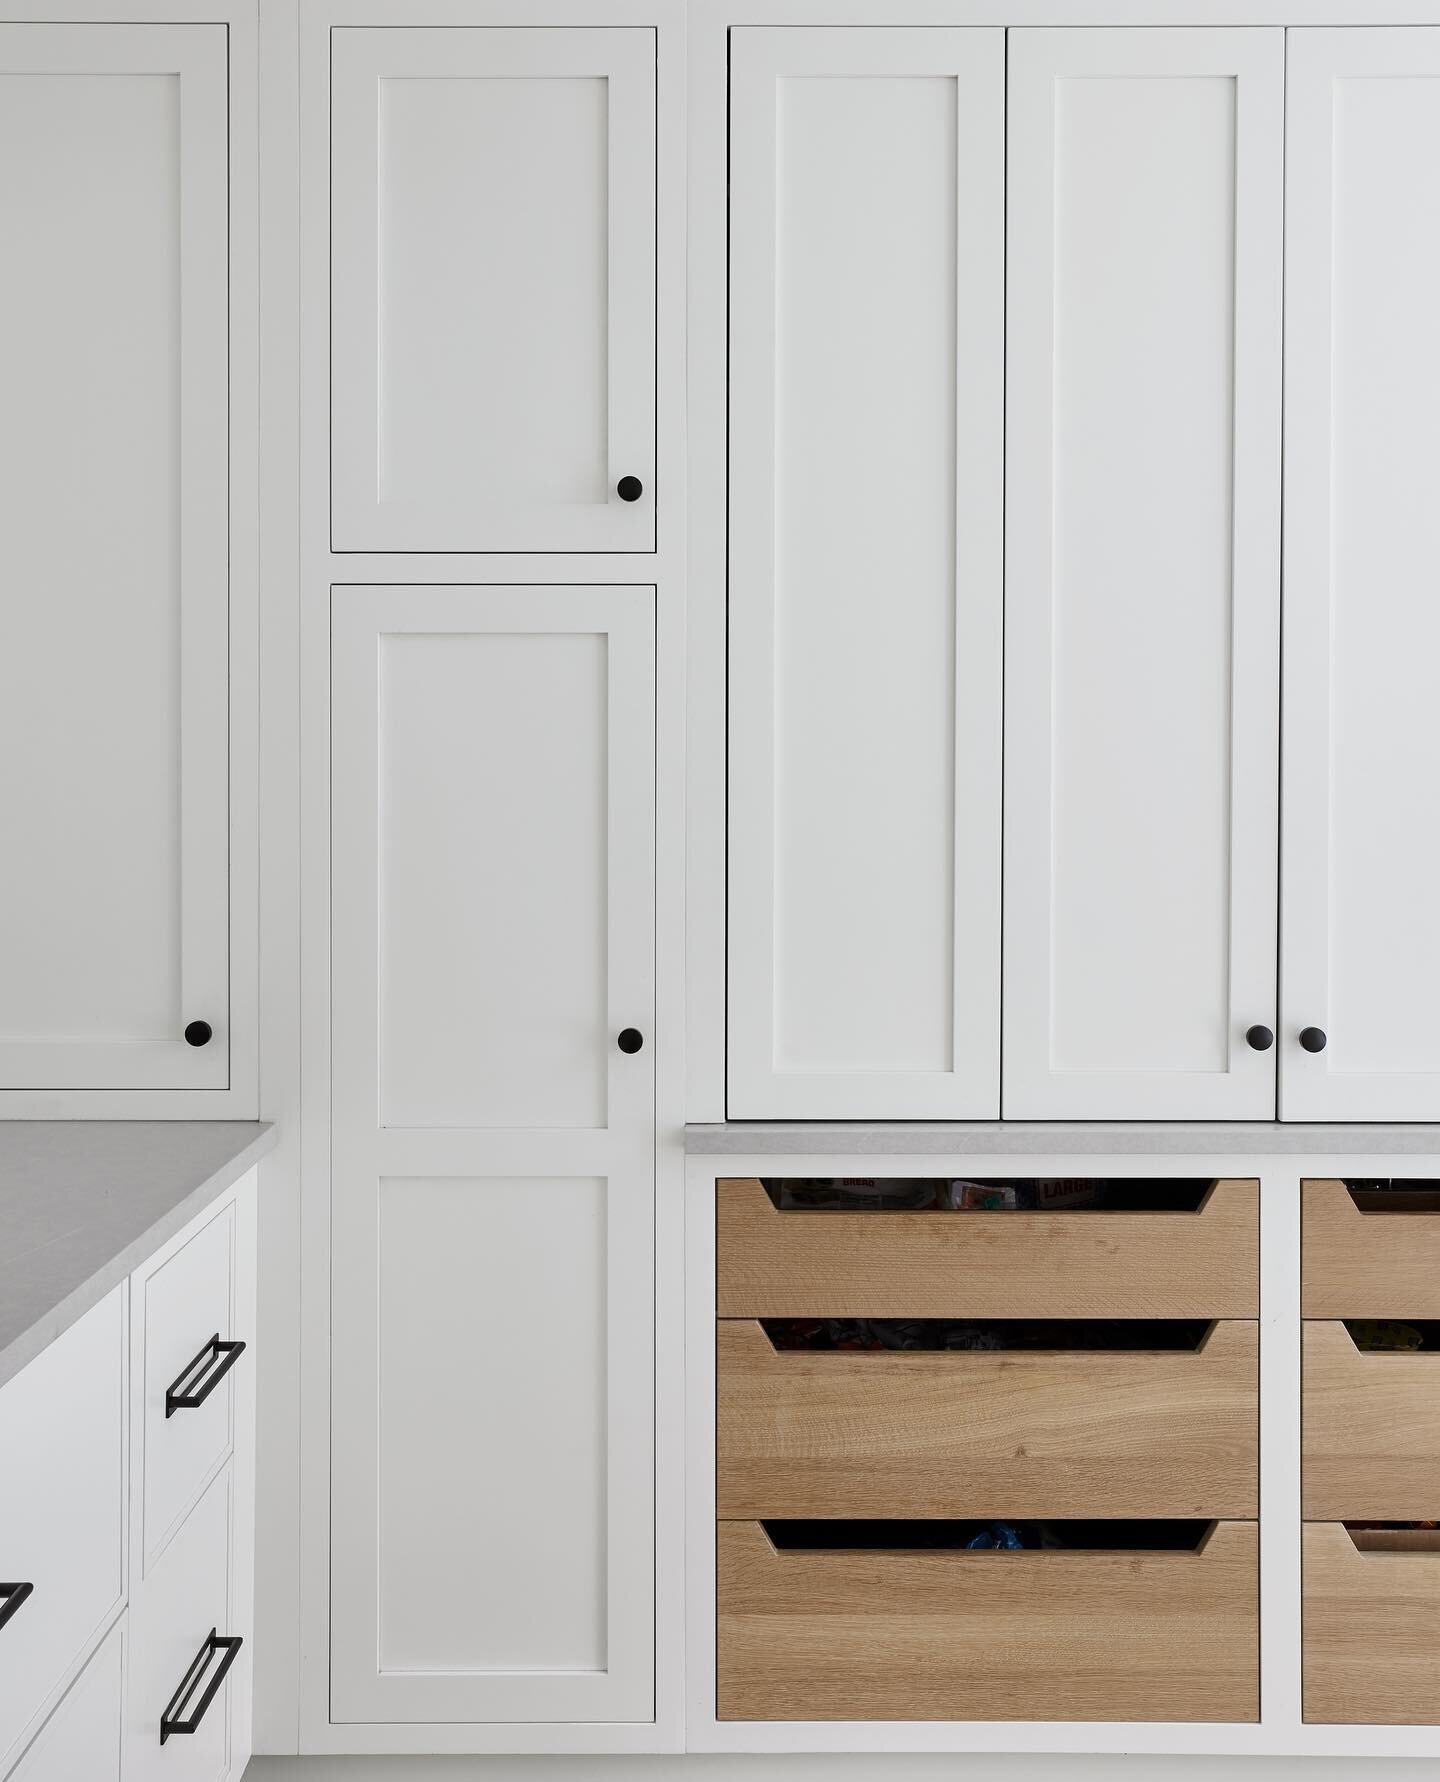 Swipe 👉  to open the pantry! Aren&rsquo;t you so glad you did? What&rsquo;s your must-have in a pantry? ⁠⠀
⁠⠀
Today&rsquo;s Tip: When designing your pantry space, remember less can be more! Shallow cabinets can be perfect for your smaller items. Hav